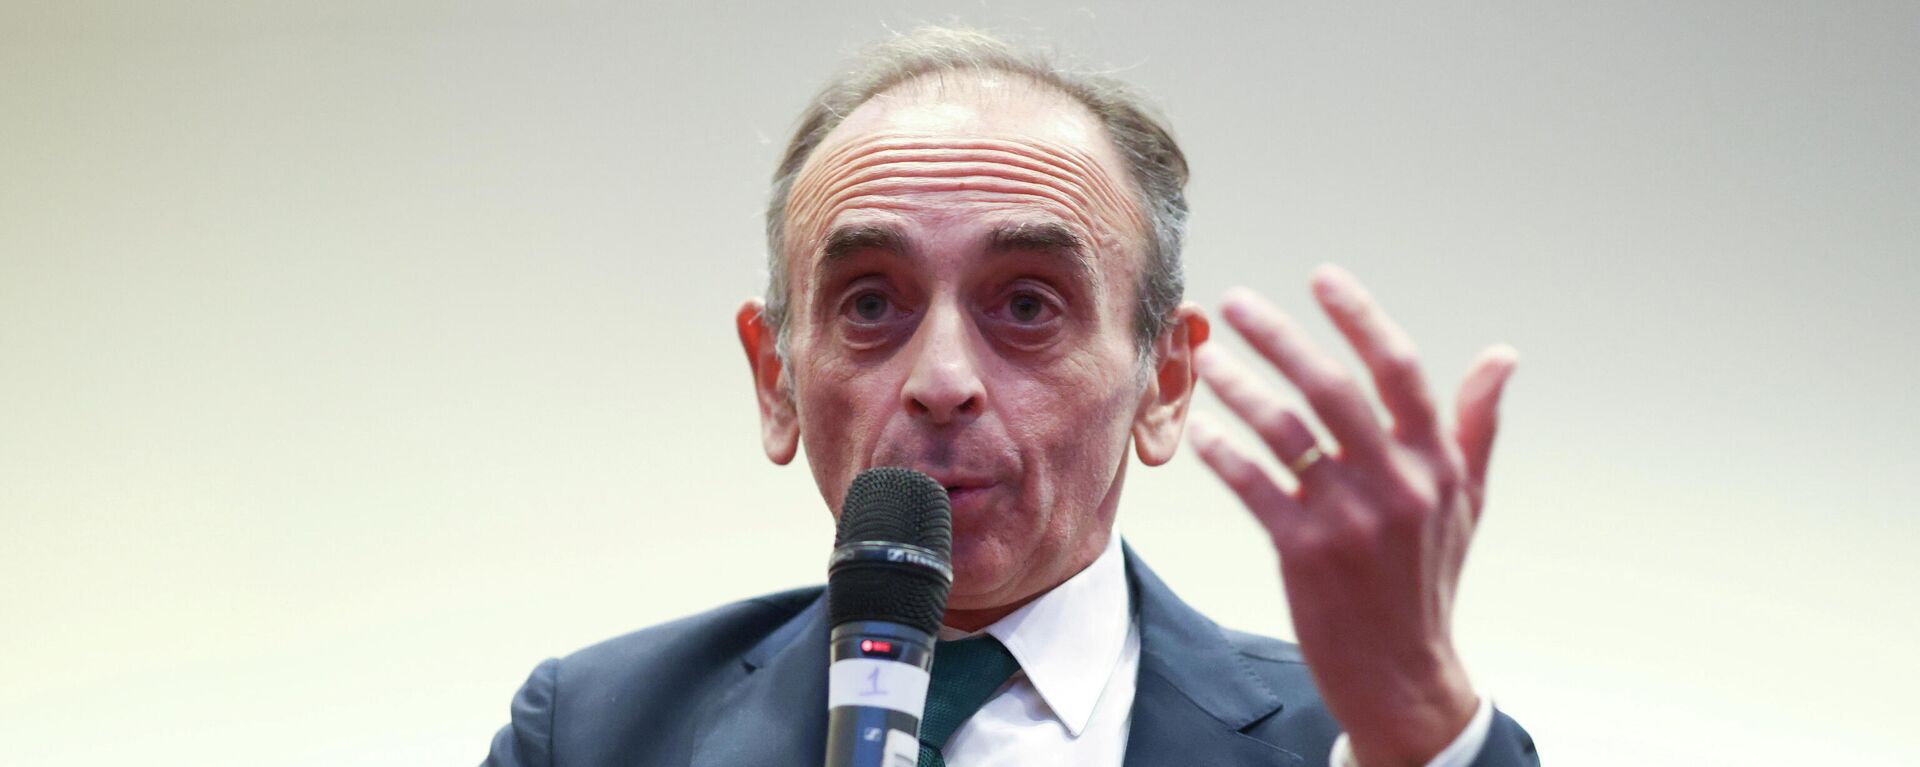 French right-wing commentator Eric Zemmour speaks at an event at the ILEC conference centre, London, Britain, November 19, 2021. - Sputnik International, 1920, 22.11.2021